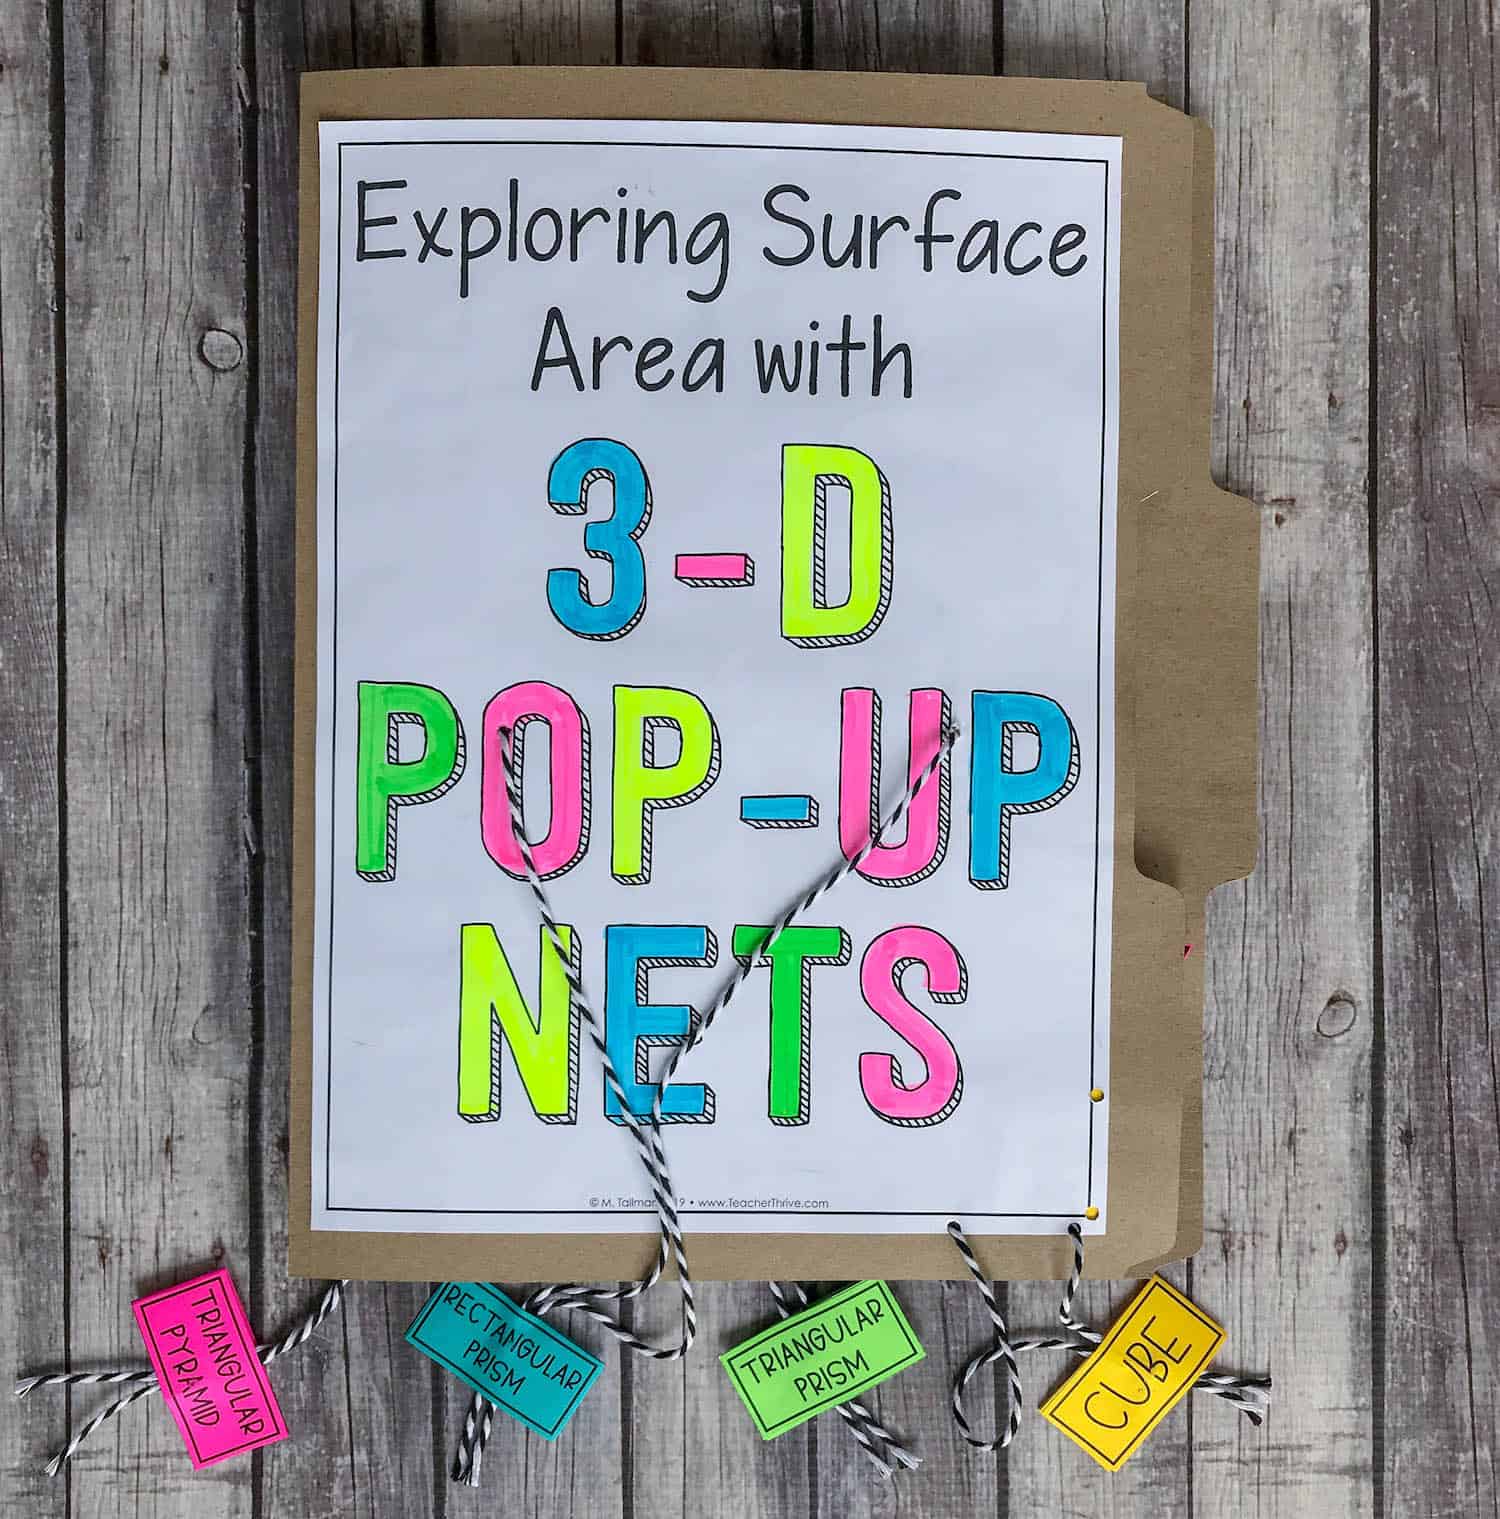 3D pop up nets for surface area